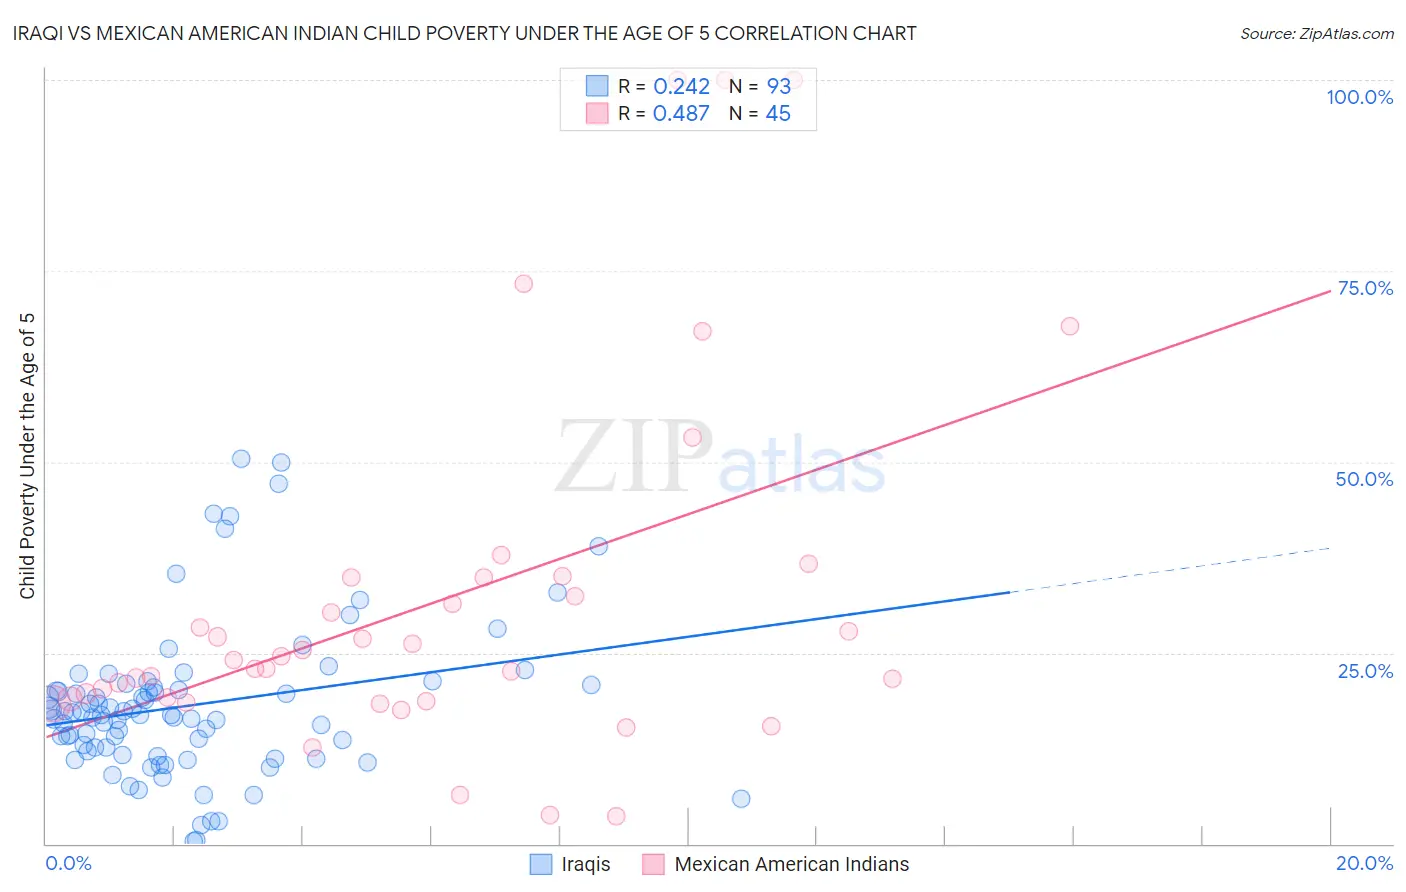 Iraqi vs Mexican American Indian Child Poverty Under the Age of 5